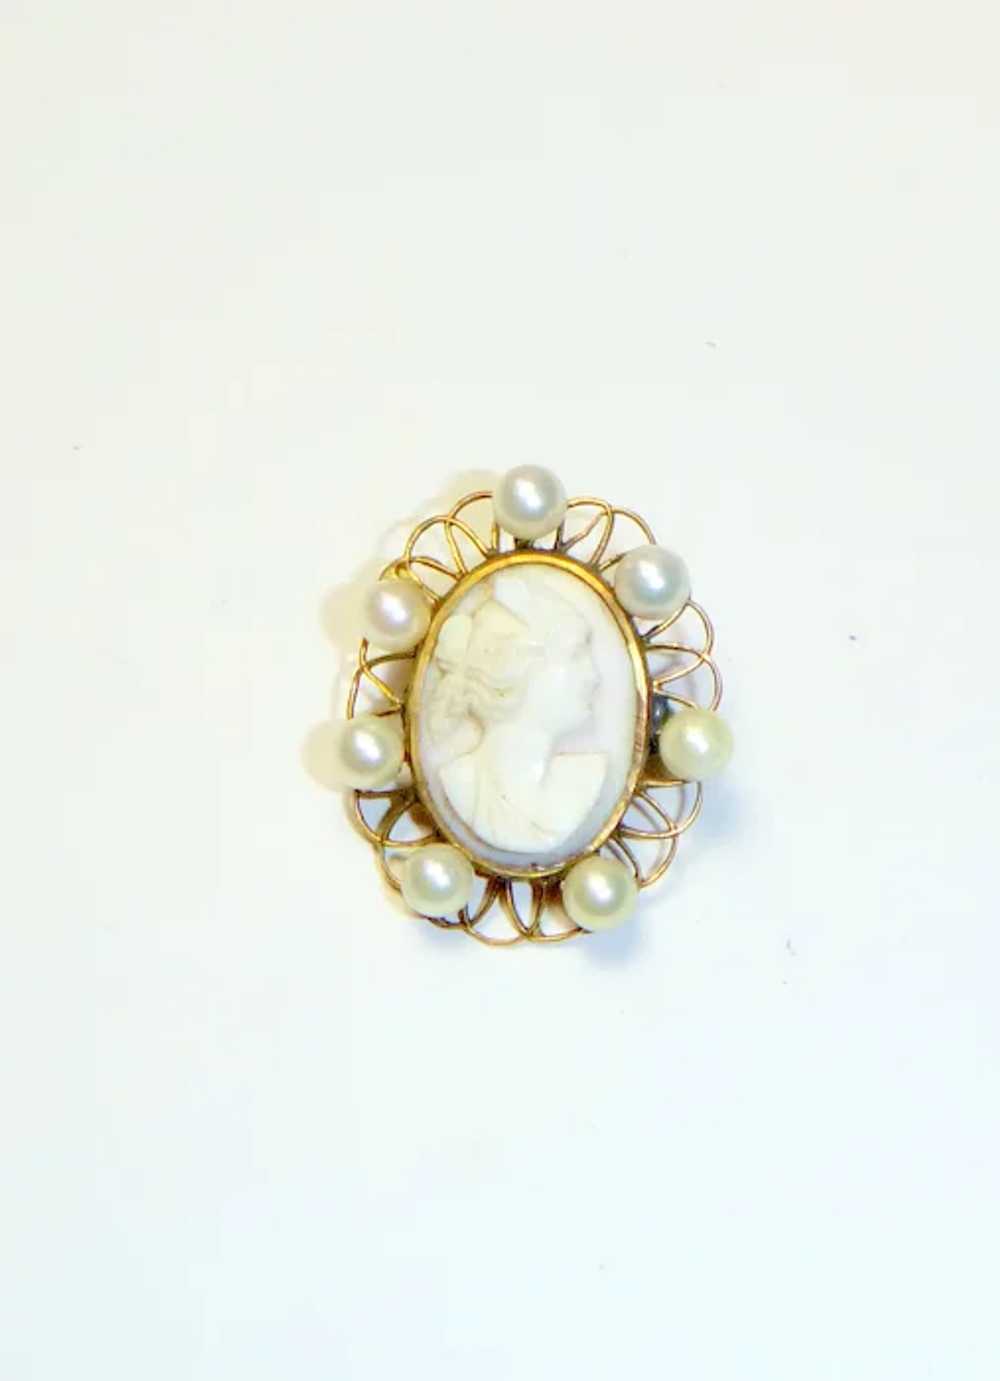 Vintage Conch Shell & Cultured Pearl Cameo Brooch - image 5